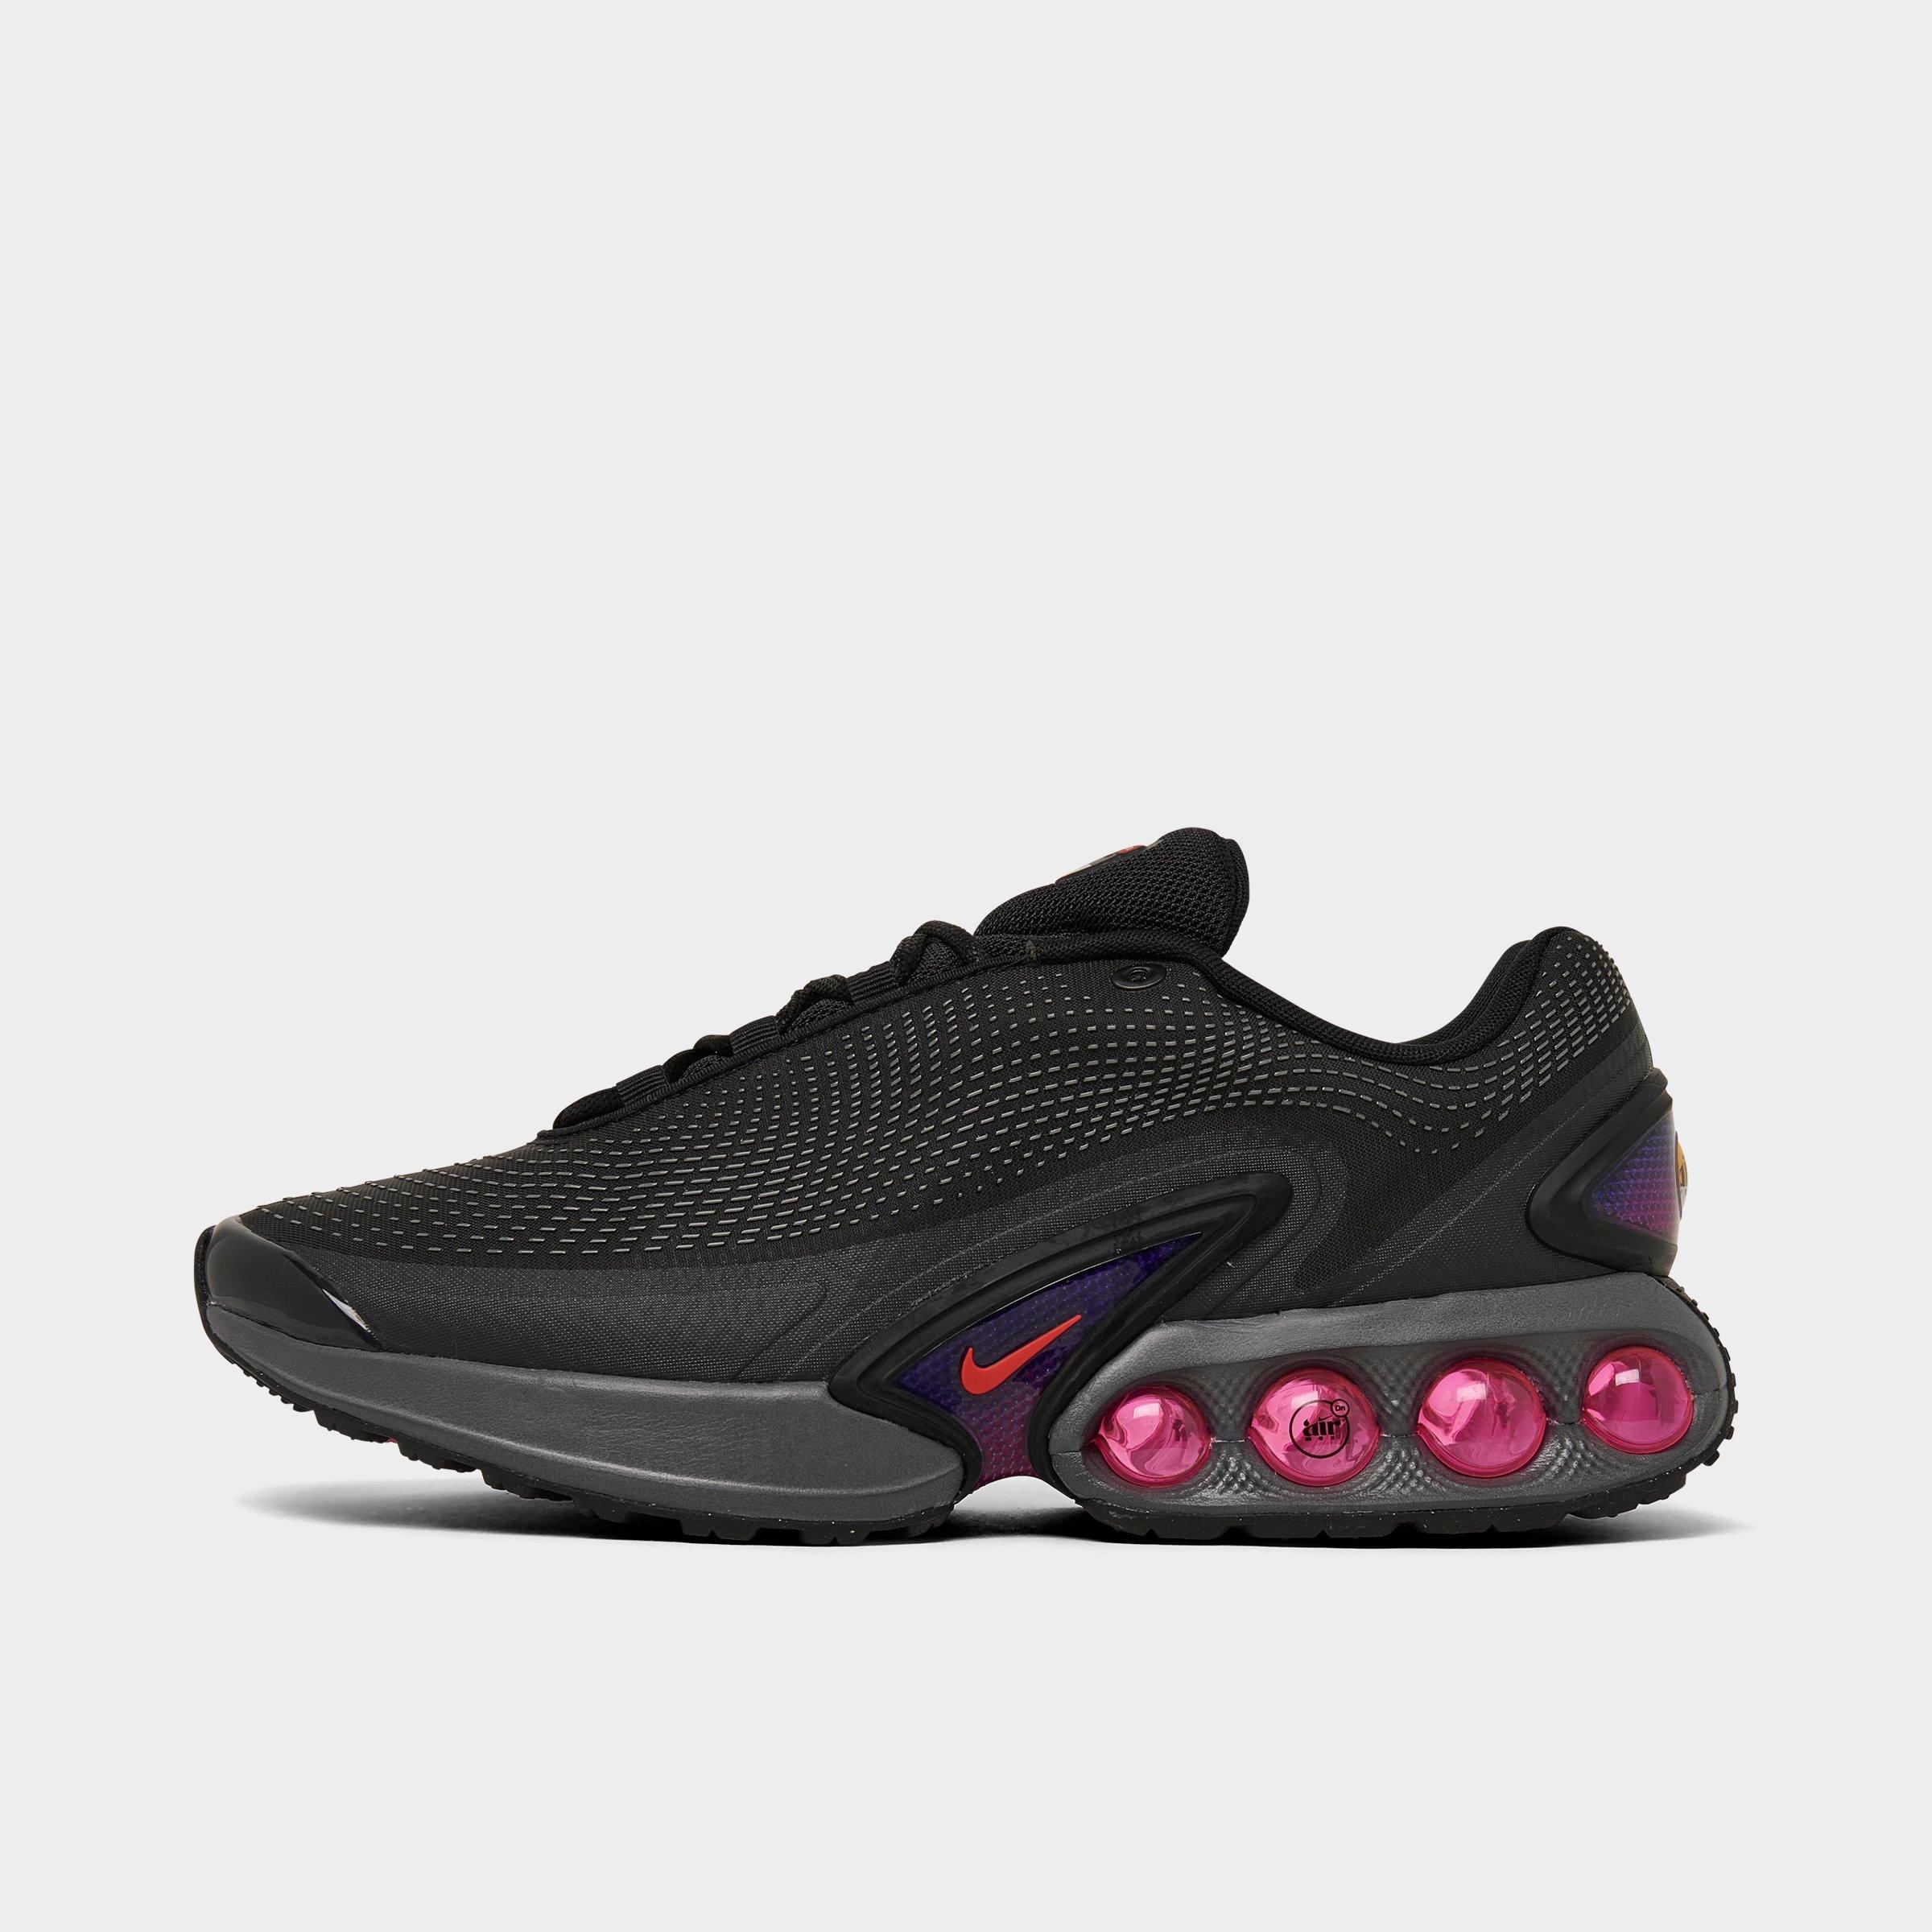 Men's Nike Air Max Dn Casual Shoes| Finish Line